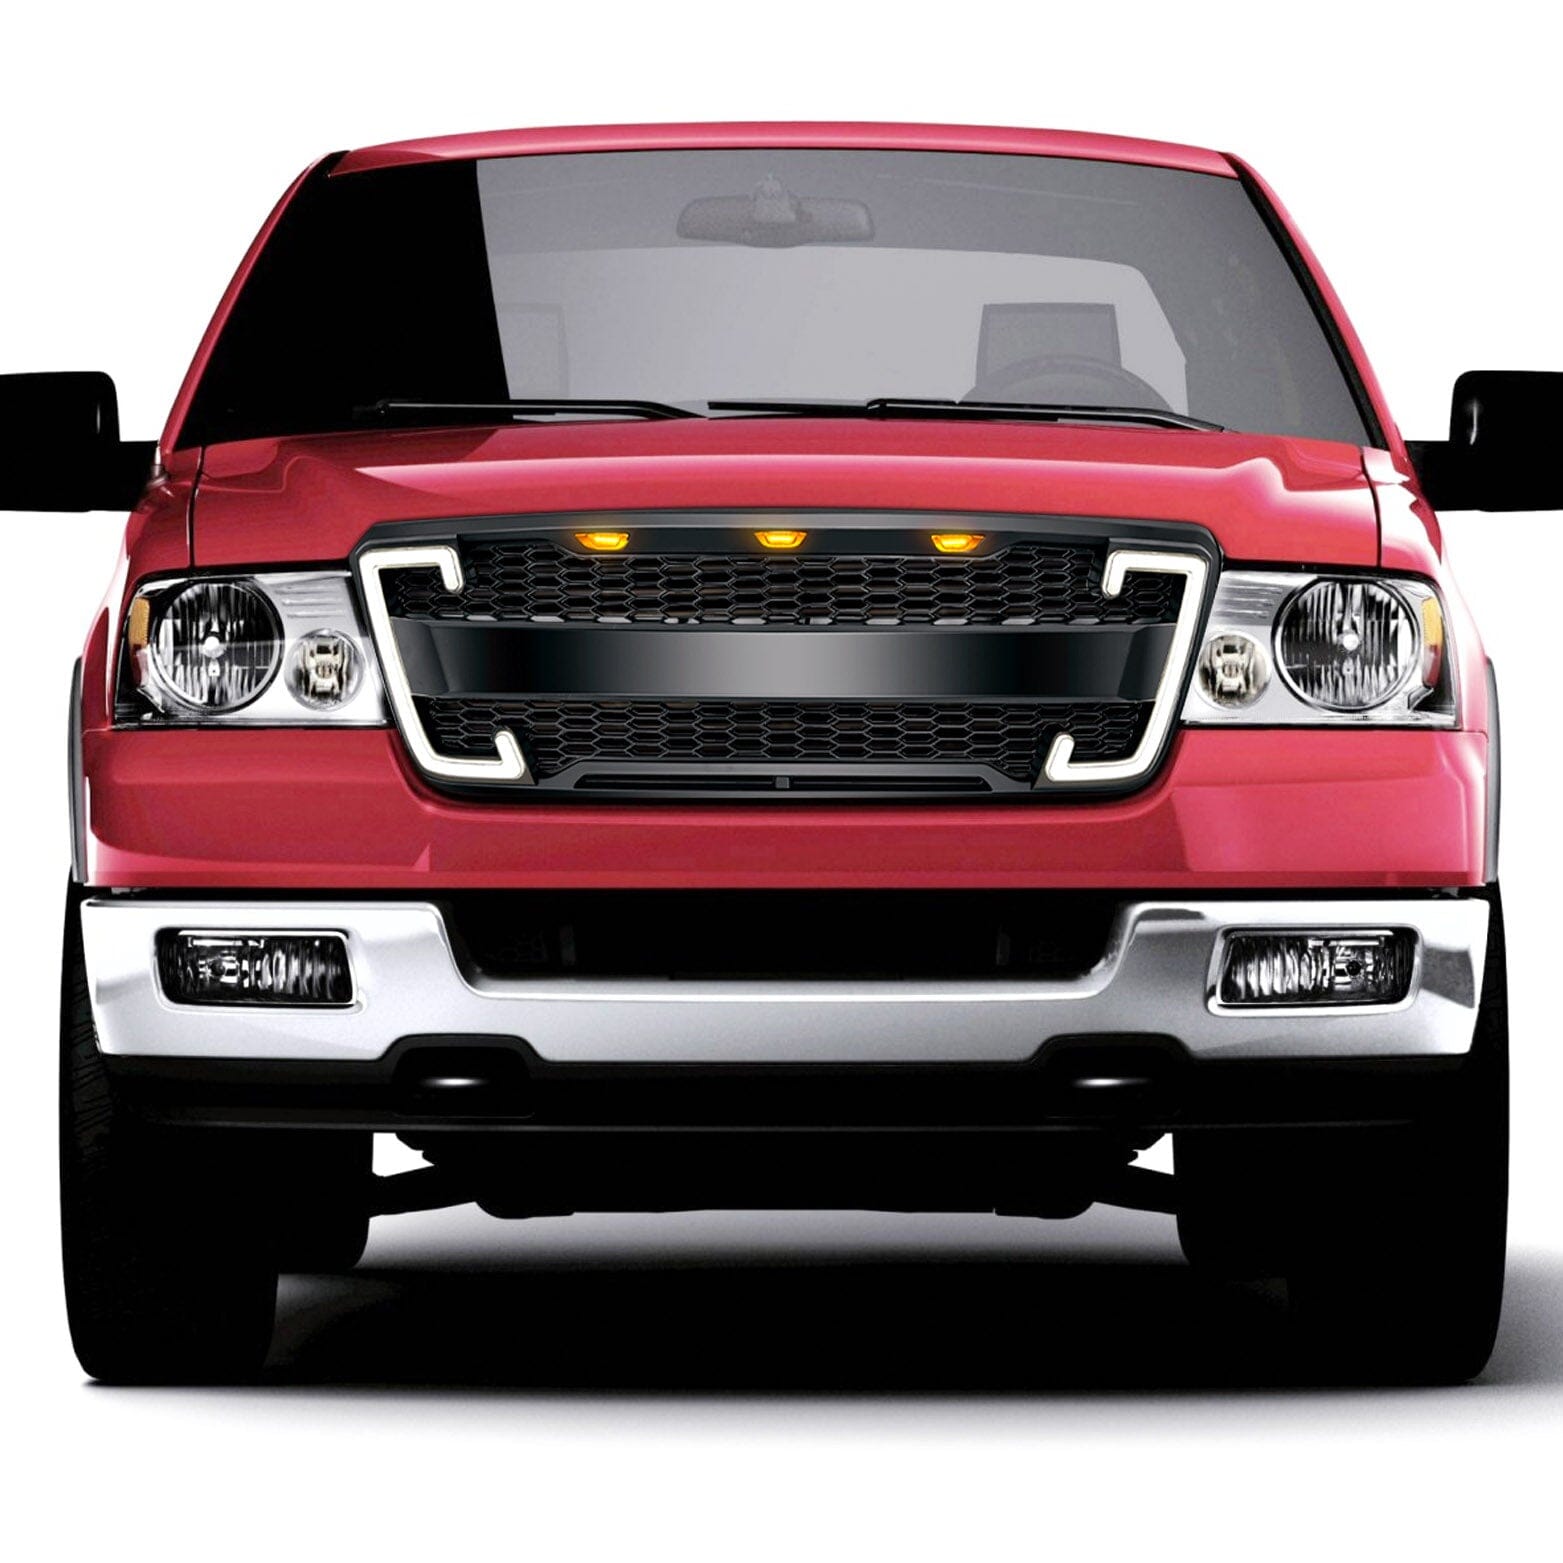 Raptor Style Mesh Grille W/DRL & Turn Signal Lights For 2004-2008 Ford F150